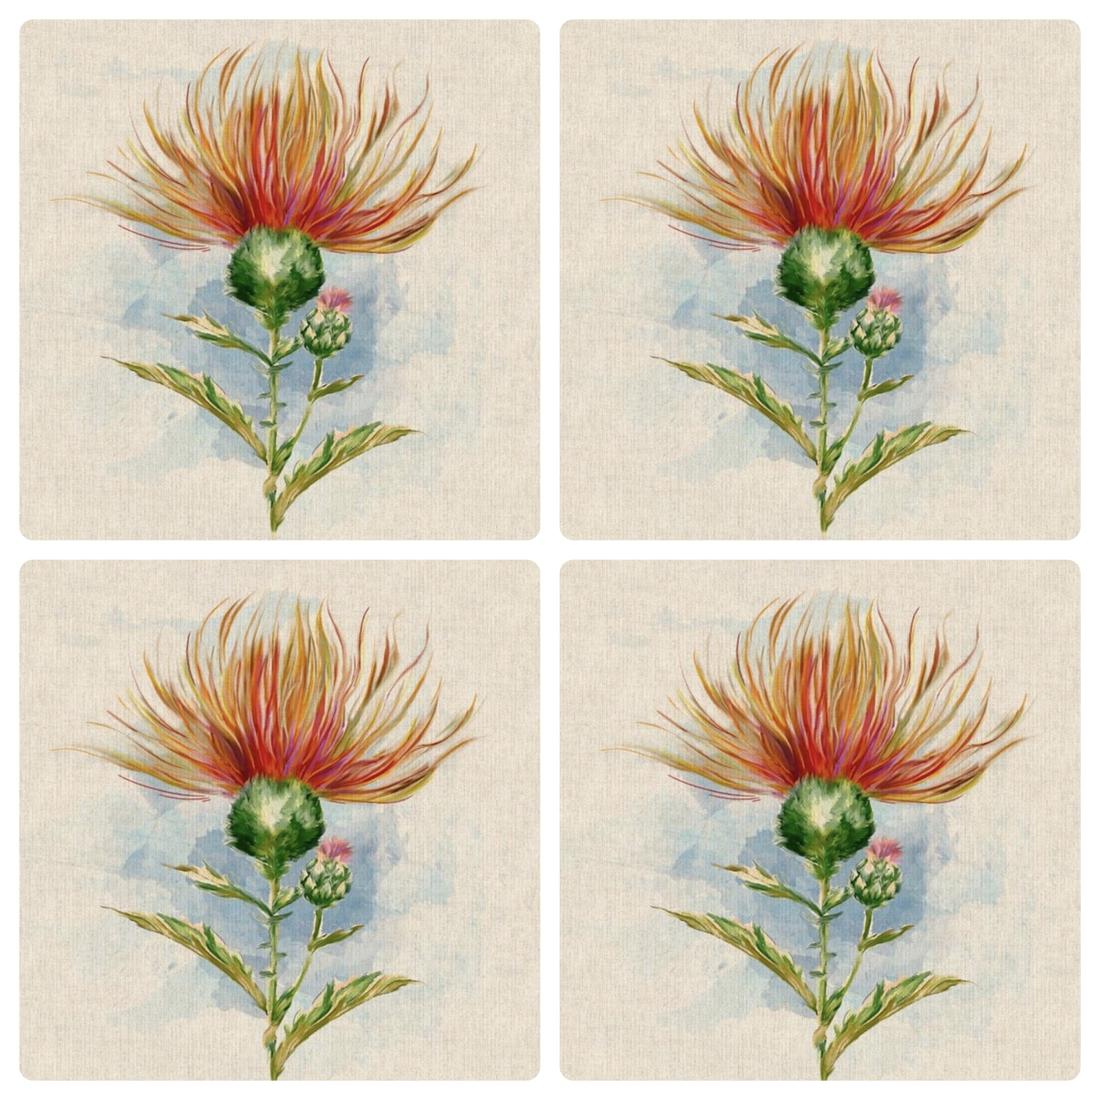 Special Offer! 4 Thistle Cushion Panels for £6